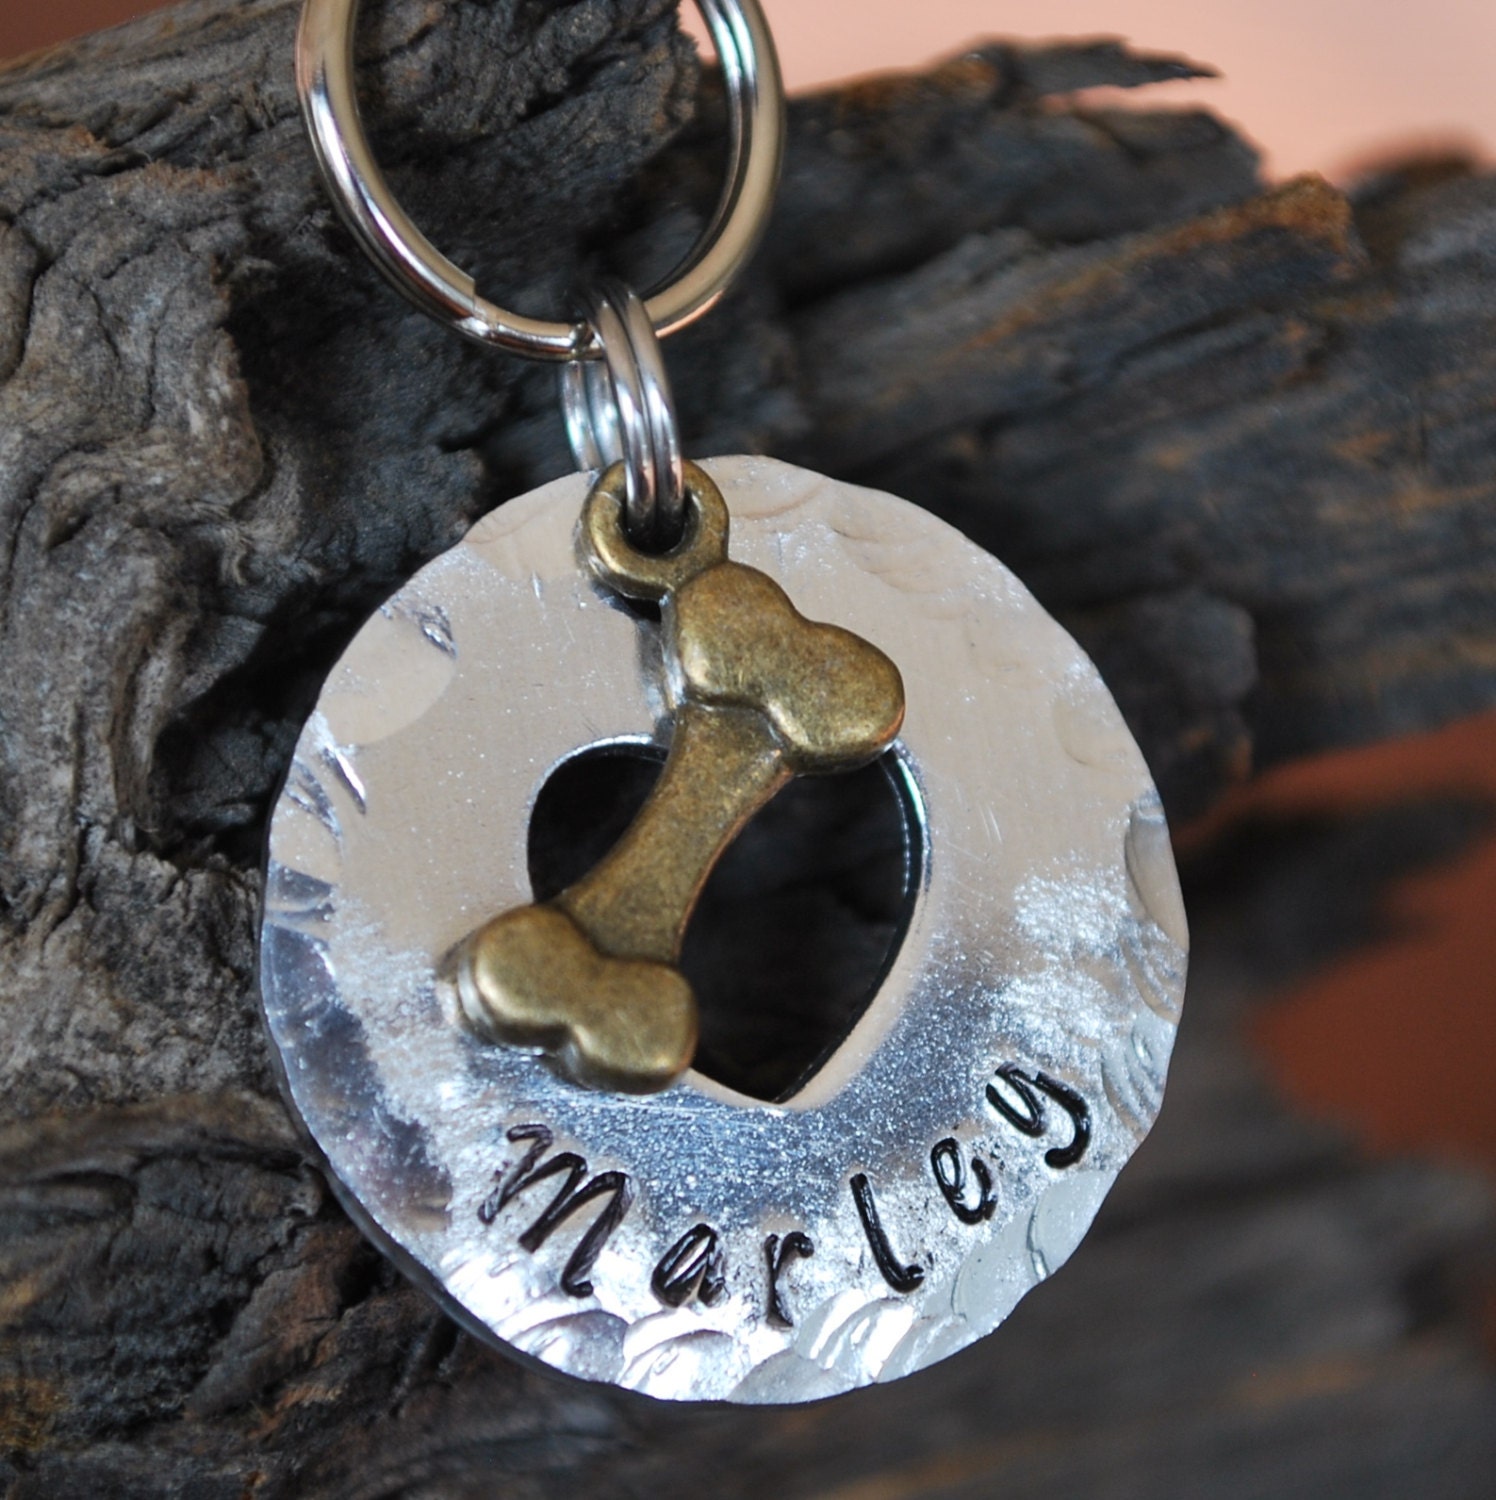 luxury dog tags for pets